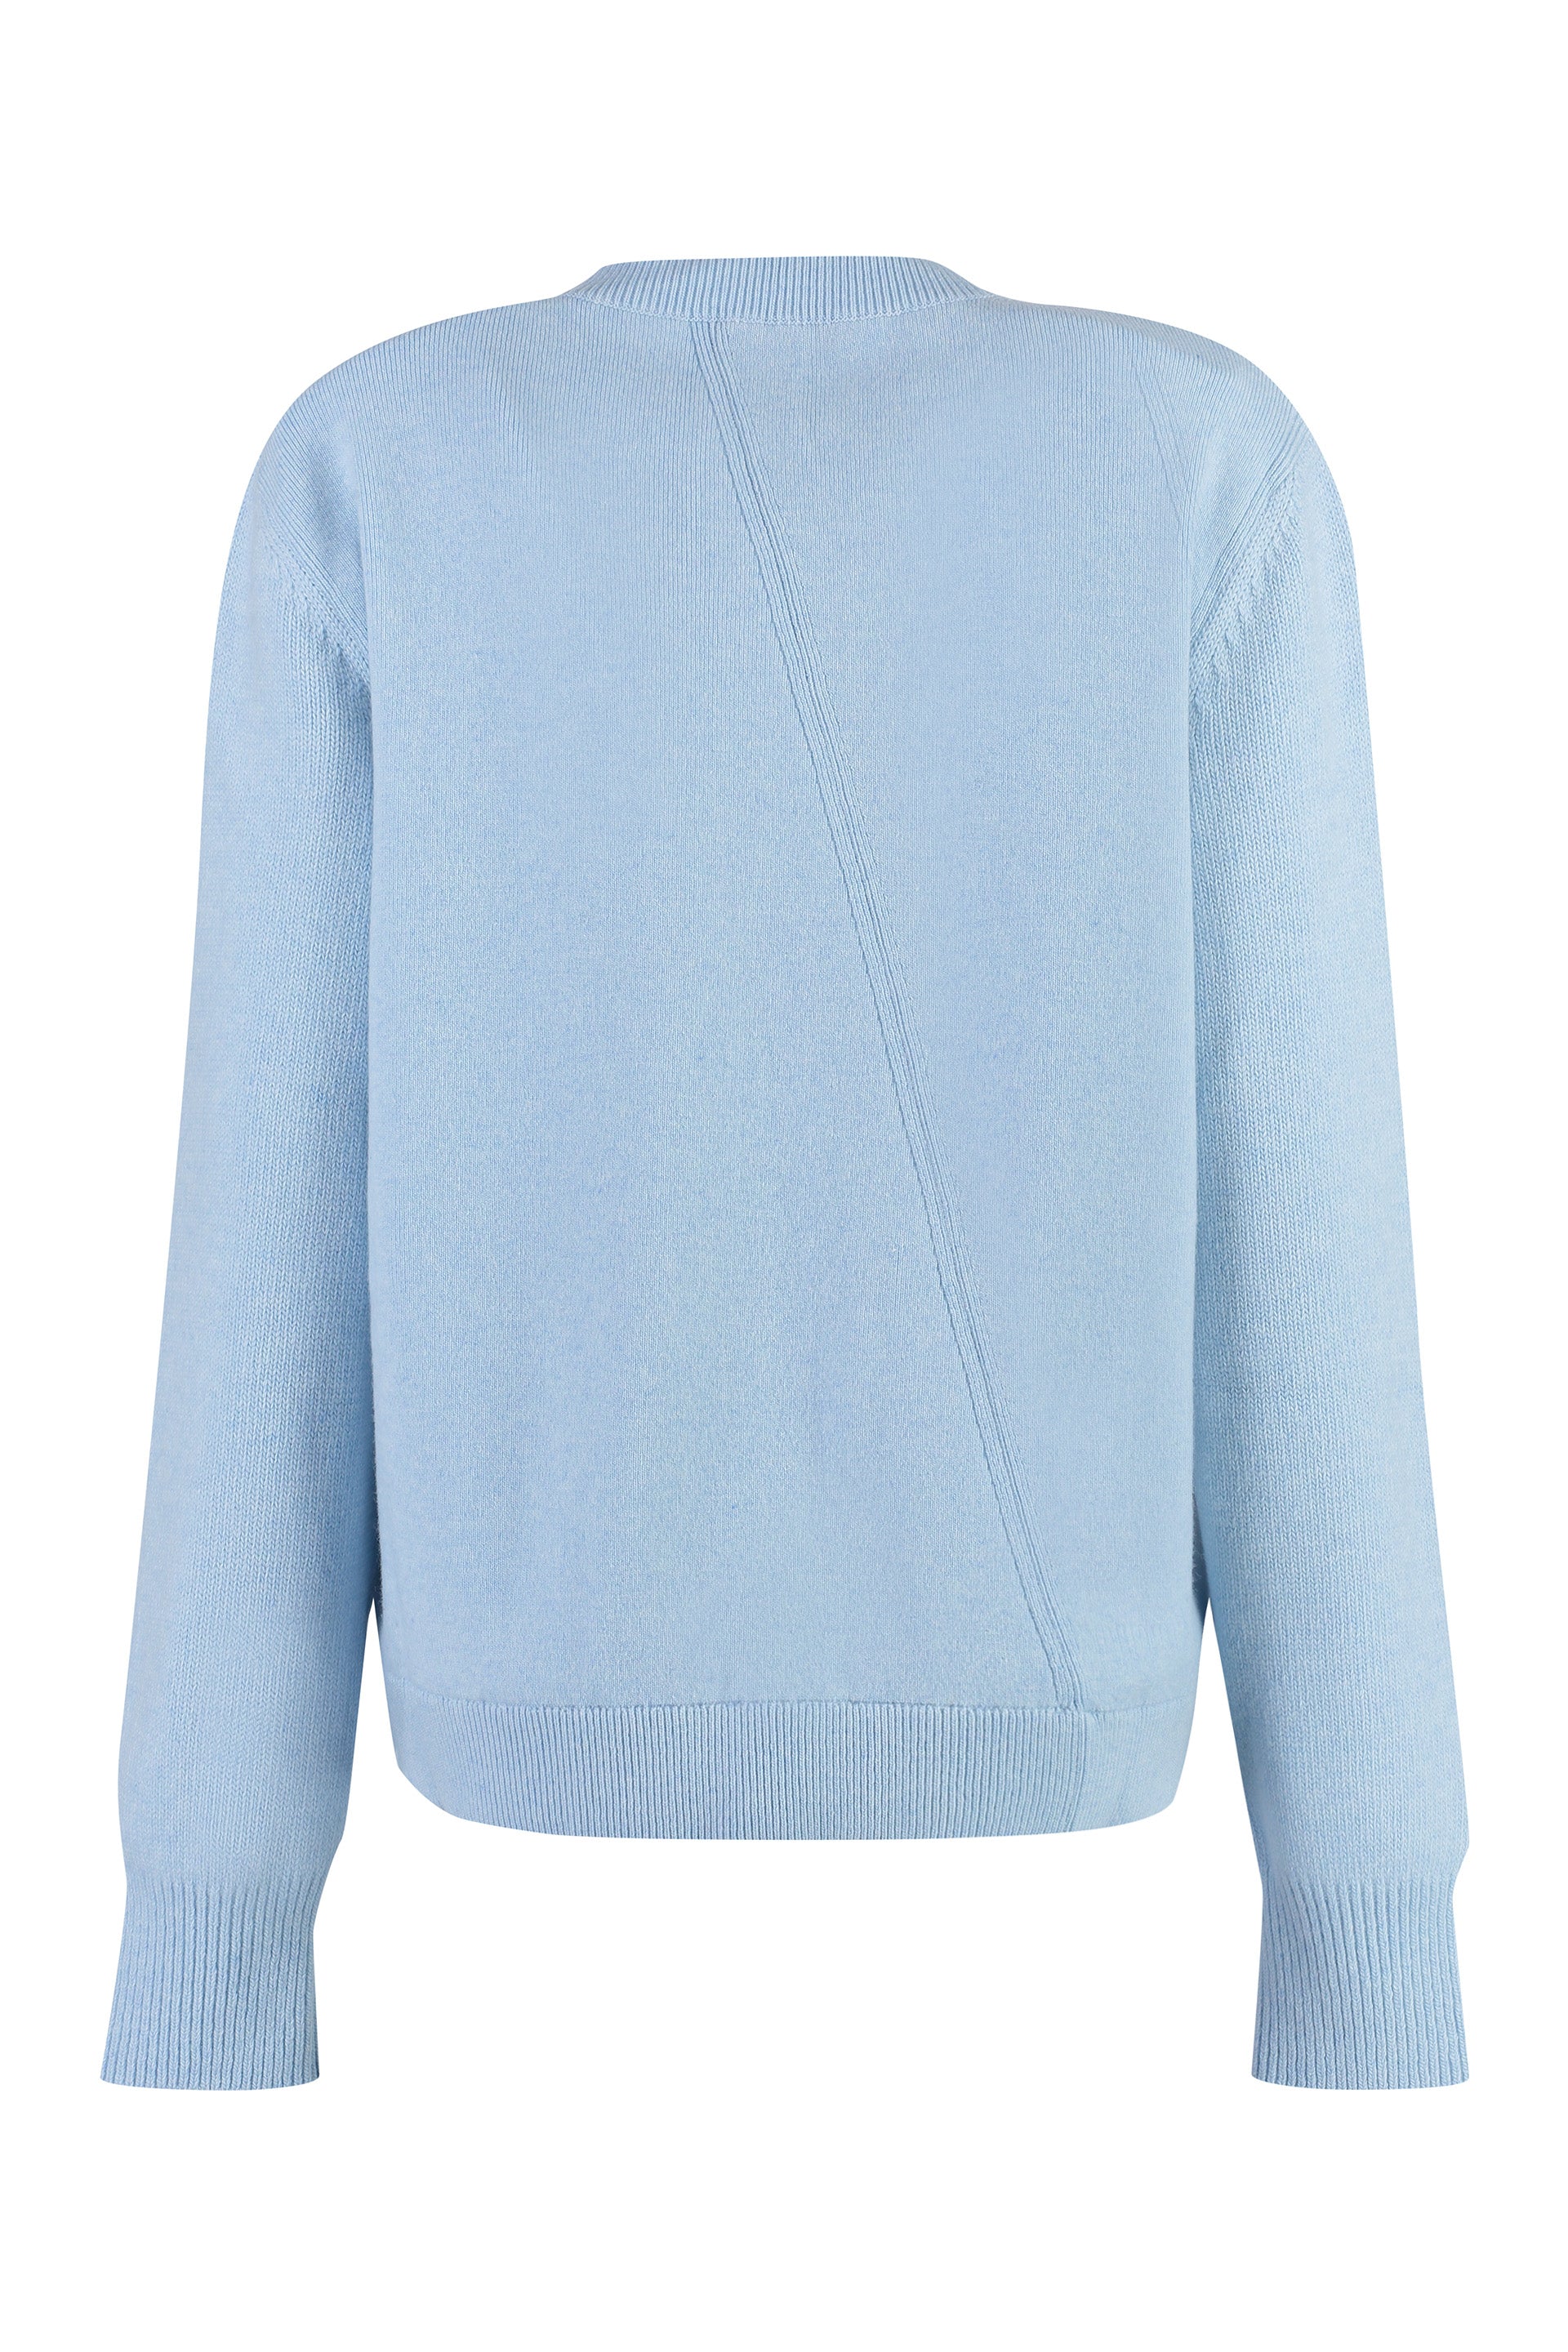 Shop Fendi Elegant Light Blue Wool And Cashmere Cardigan With Front Knot Detail For Women